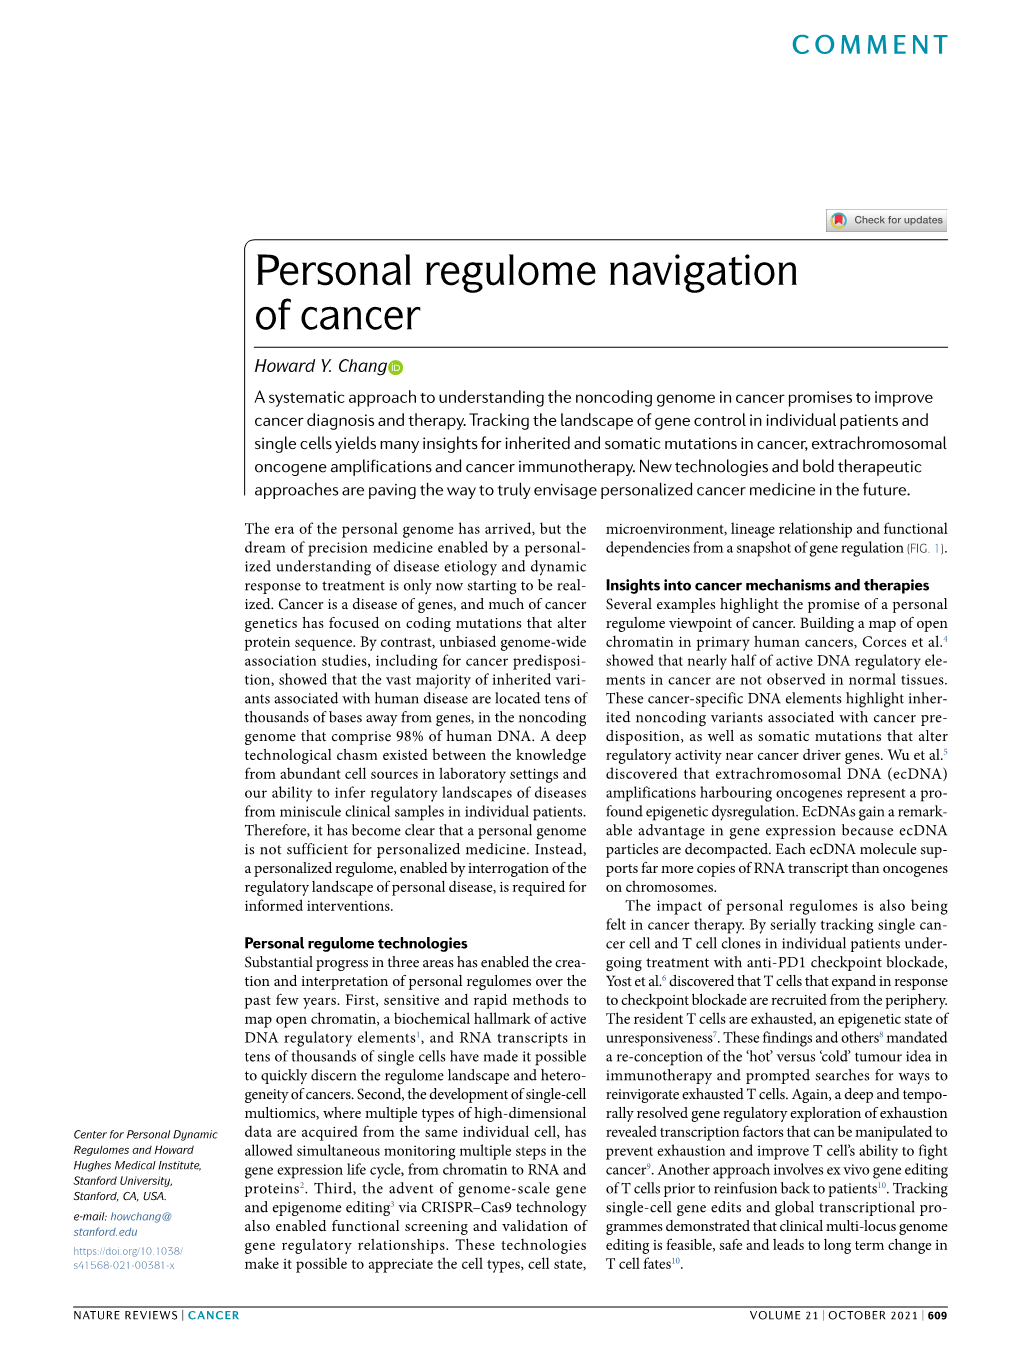 Personal Regulome Navigation of Cancer